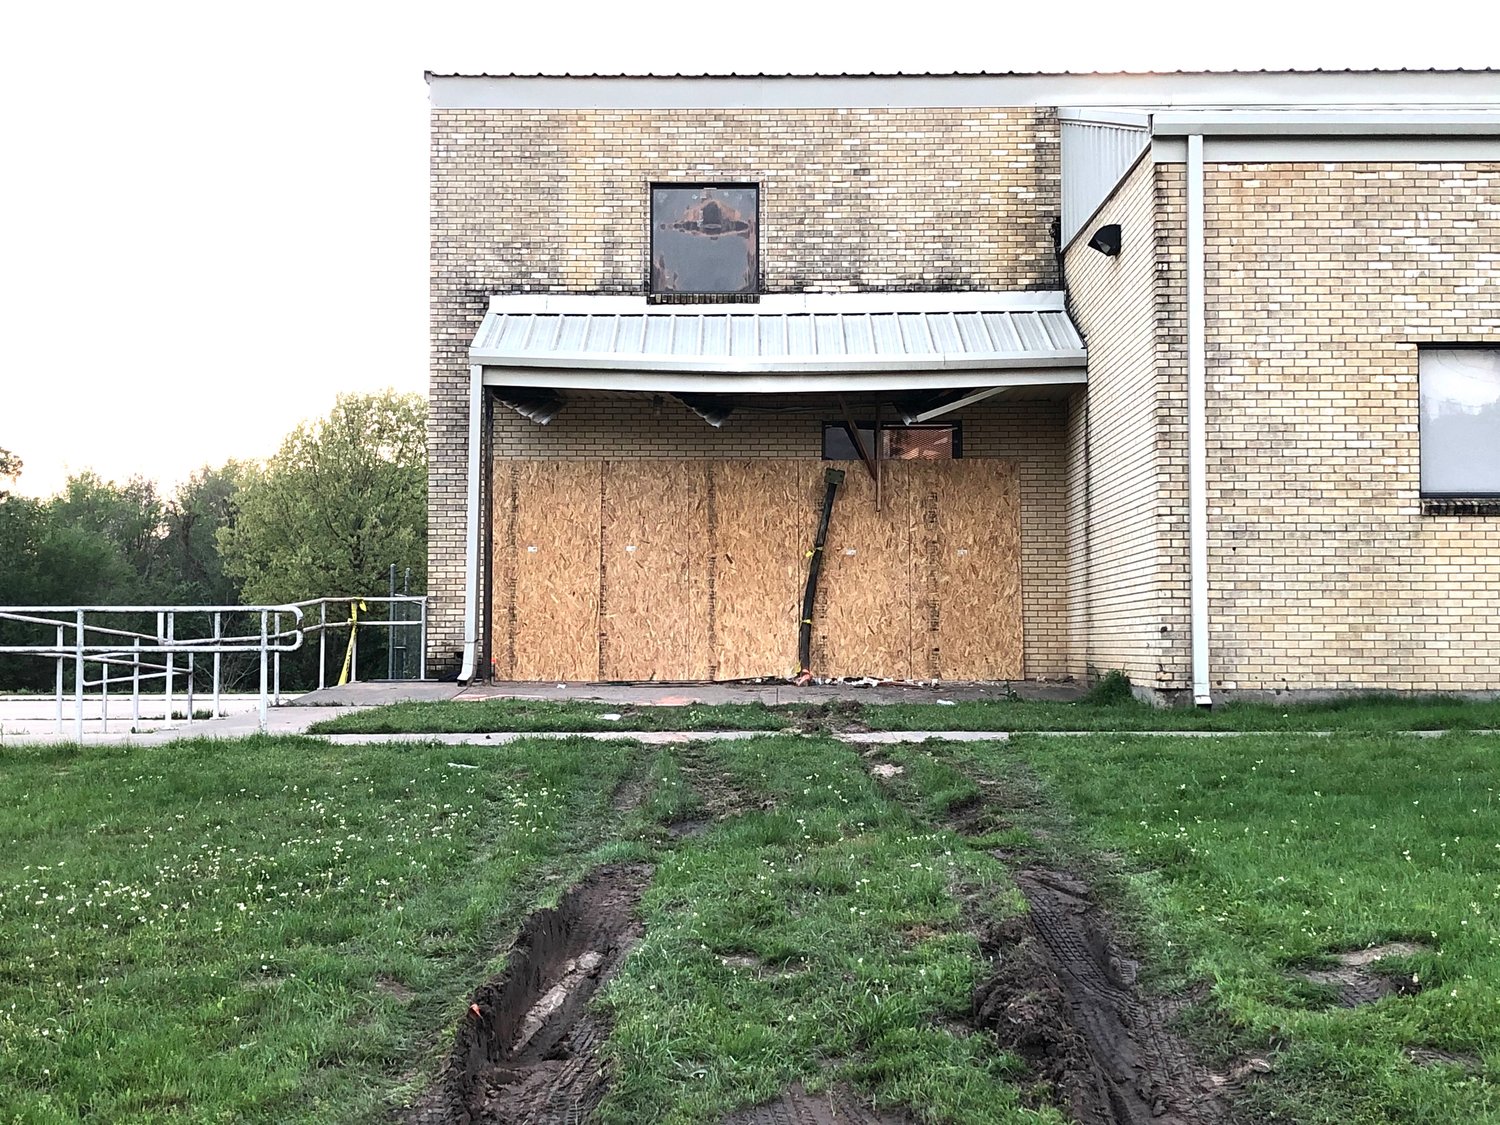 The gym at the Addie McFarland School in Mineola was boarded up last week after a man ran into it with his vehicle, apparently after a medical emergency.